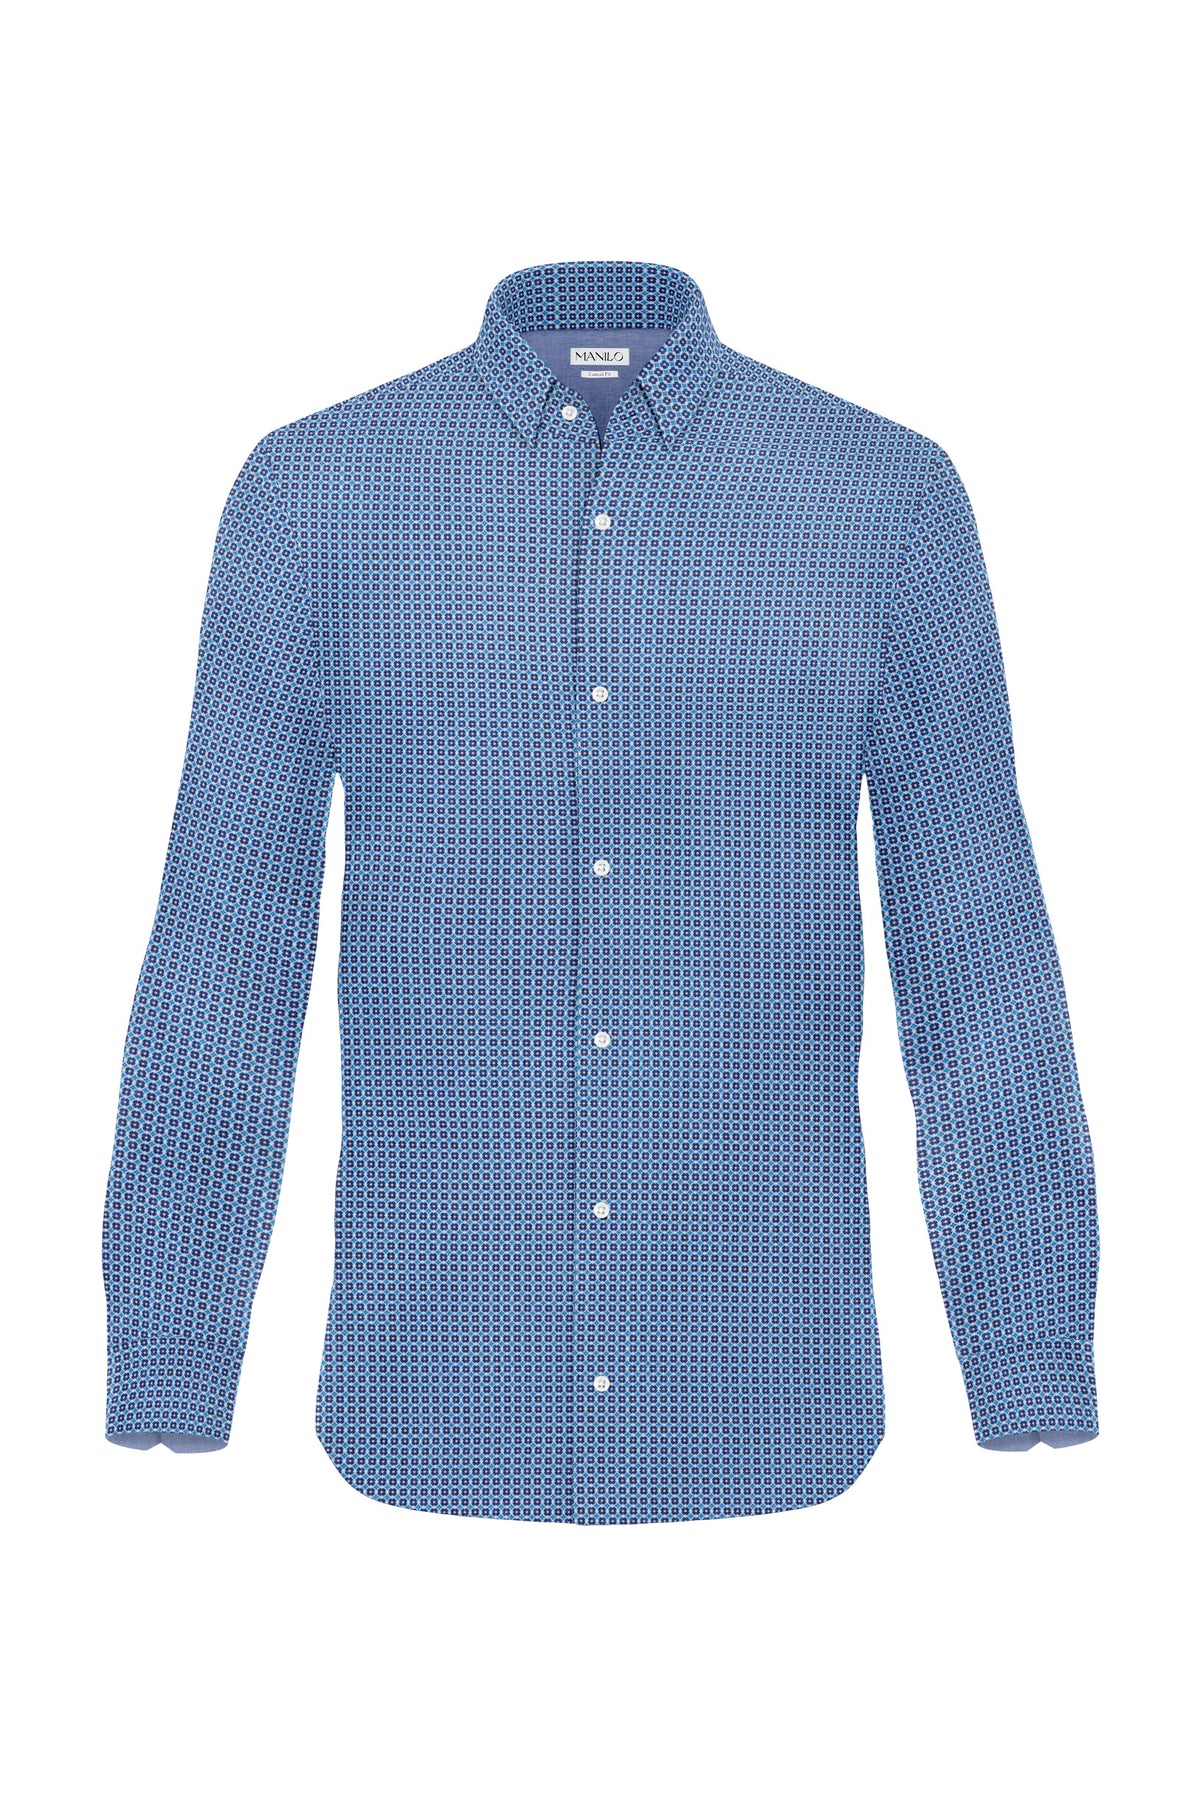 Casual shirt with graphic pattern in blue (Art. 2235-C)